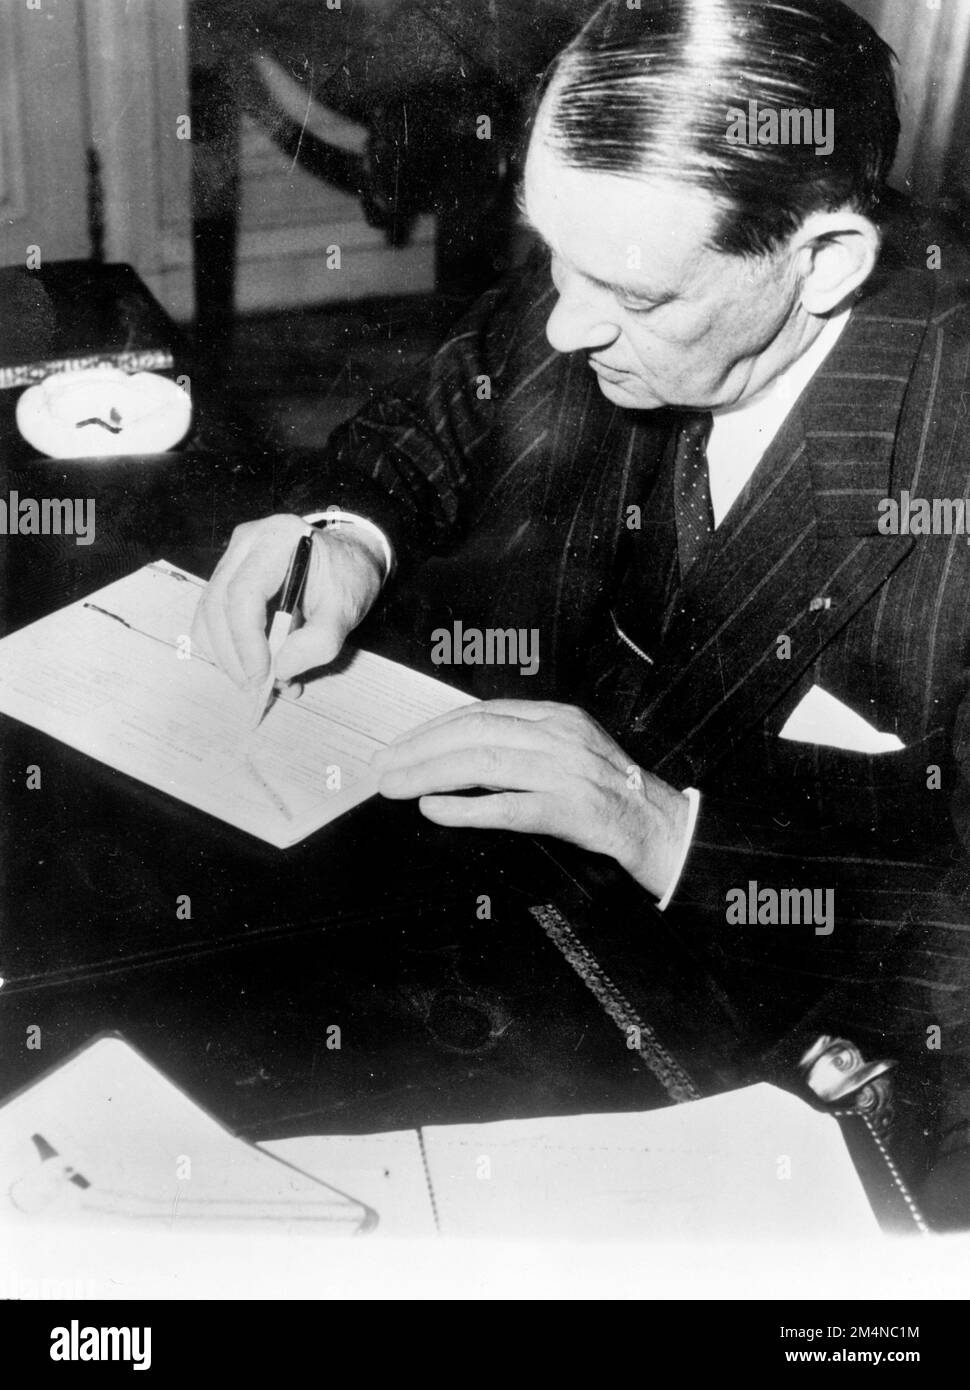 President Coty Registers For French Census. Photographs of Marshall Plan Programs, Exhibits, and Personnel Stock Photo